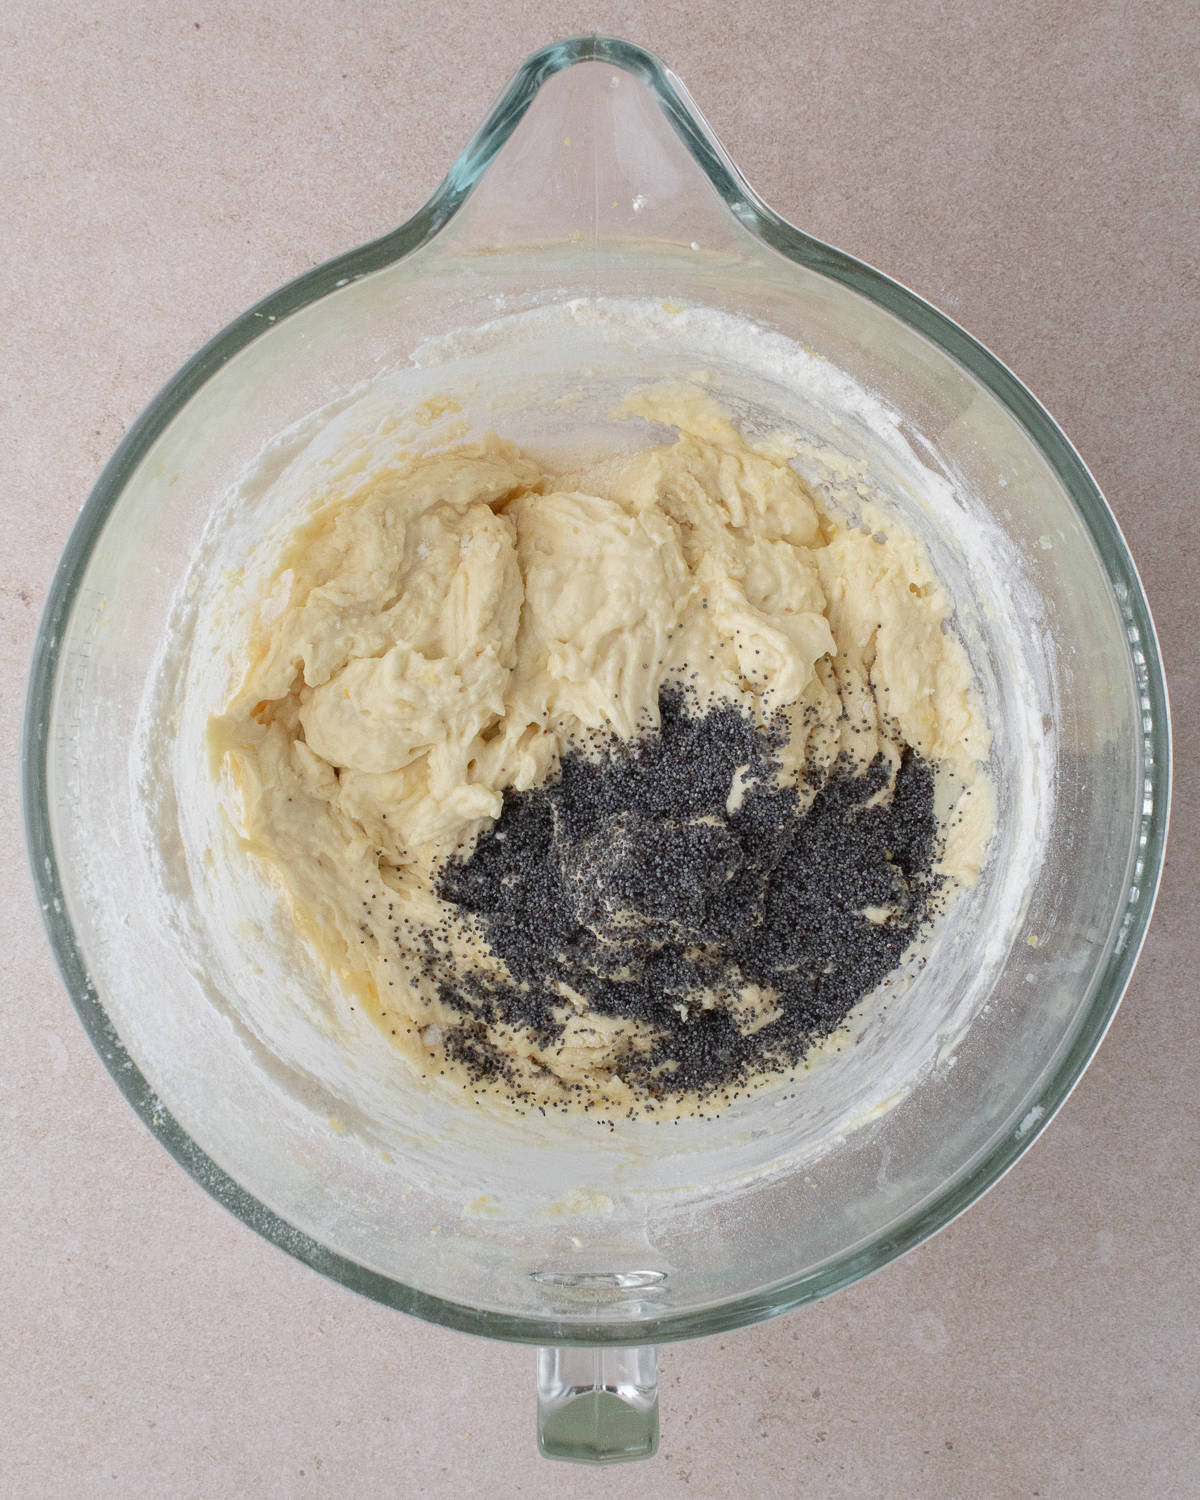 Poppy seeds are added to batter